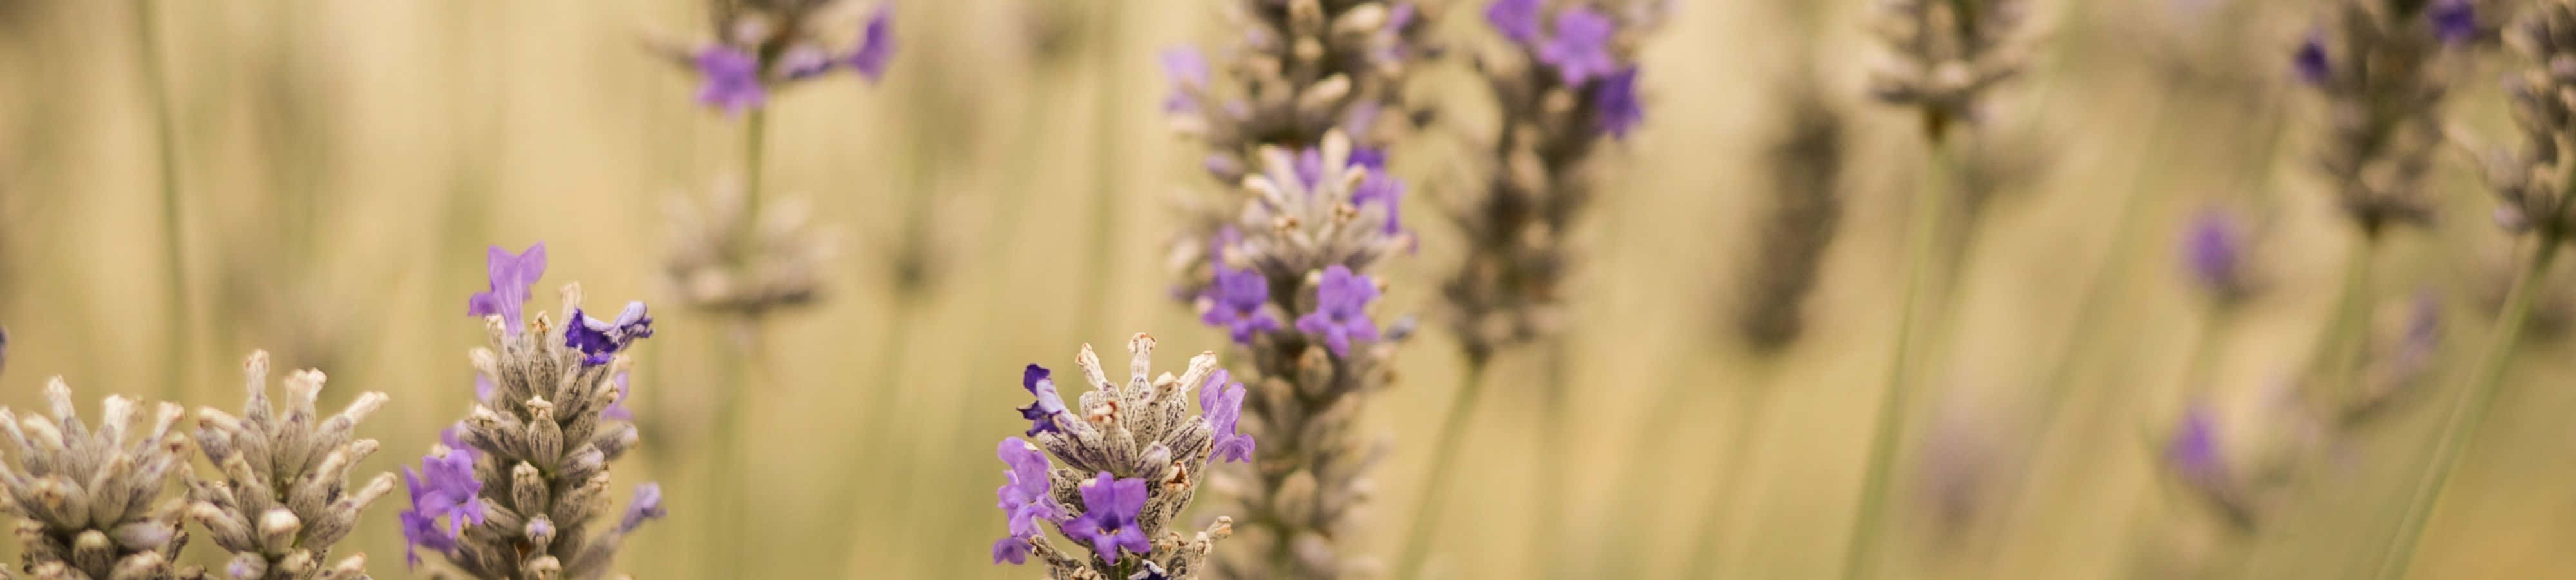 Lavender Flowers In A Field With A Blurry Background